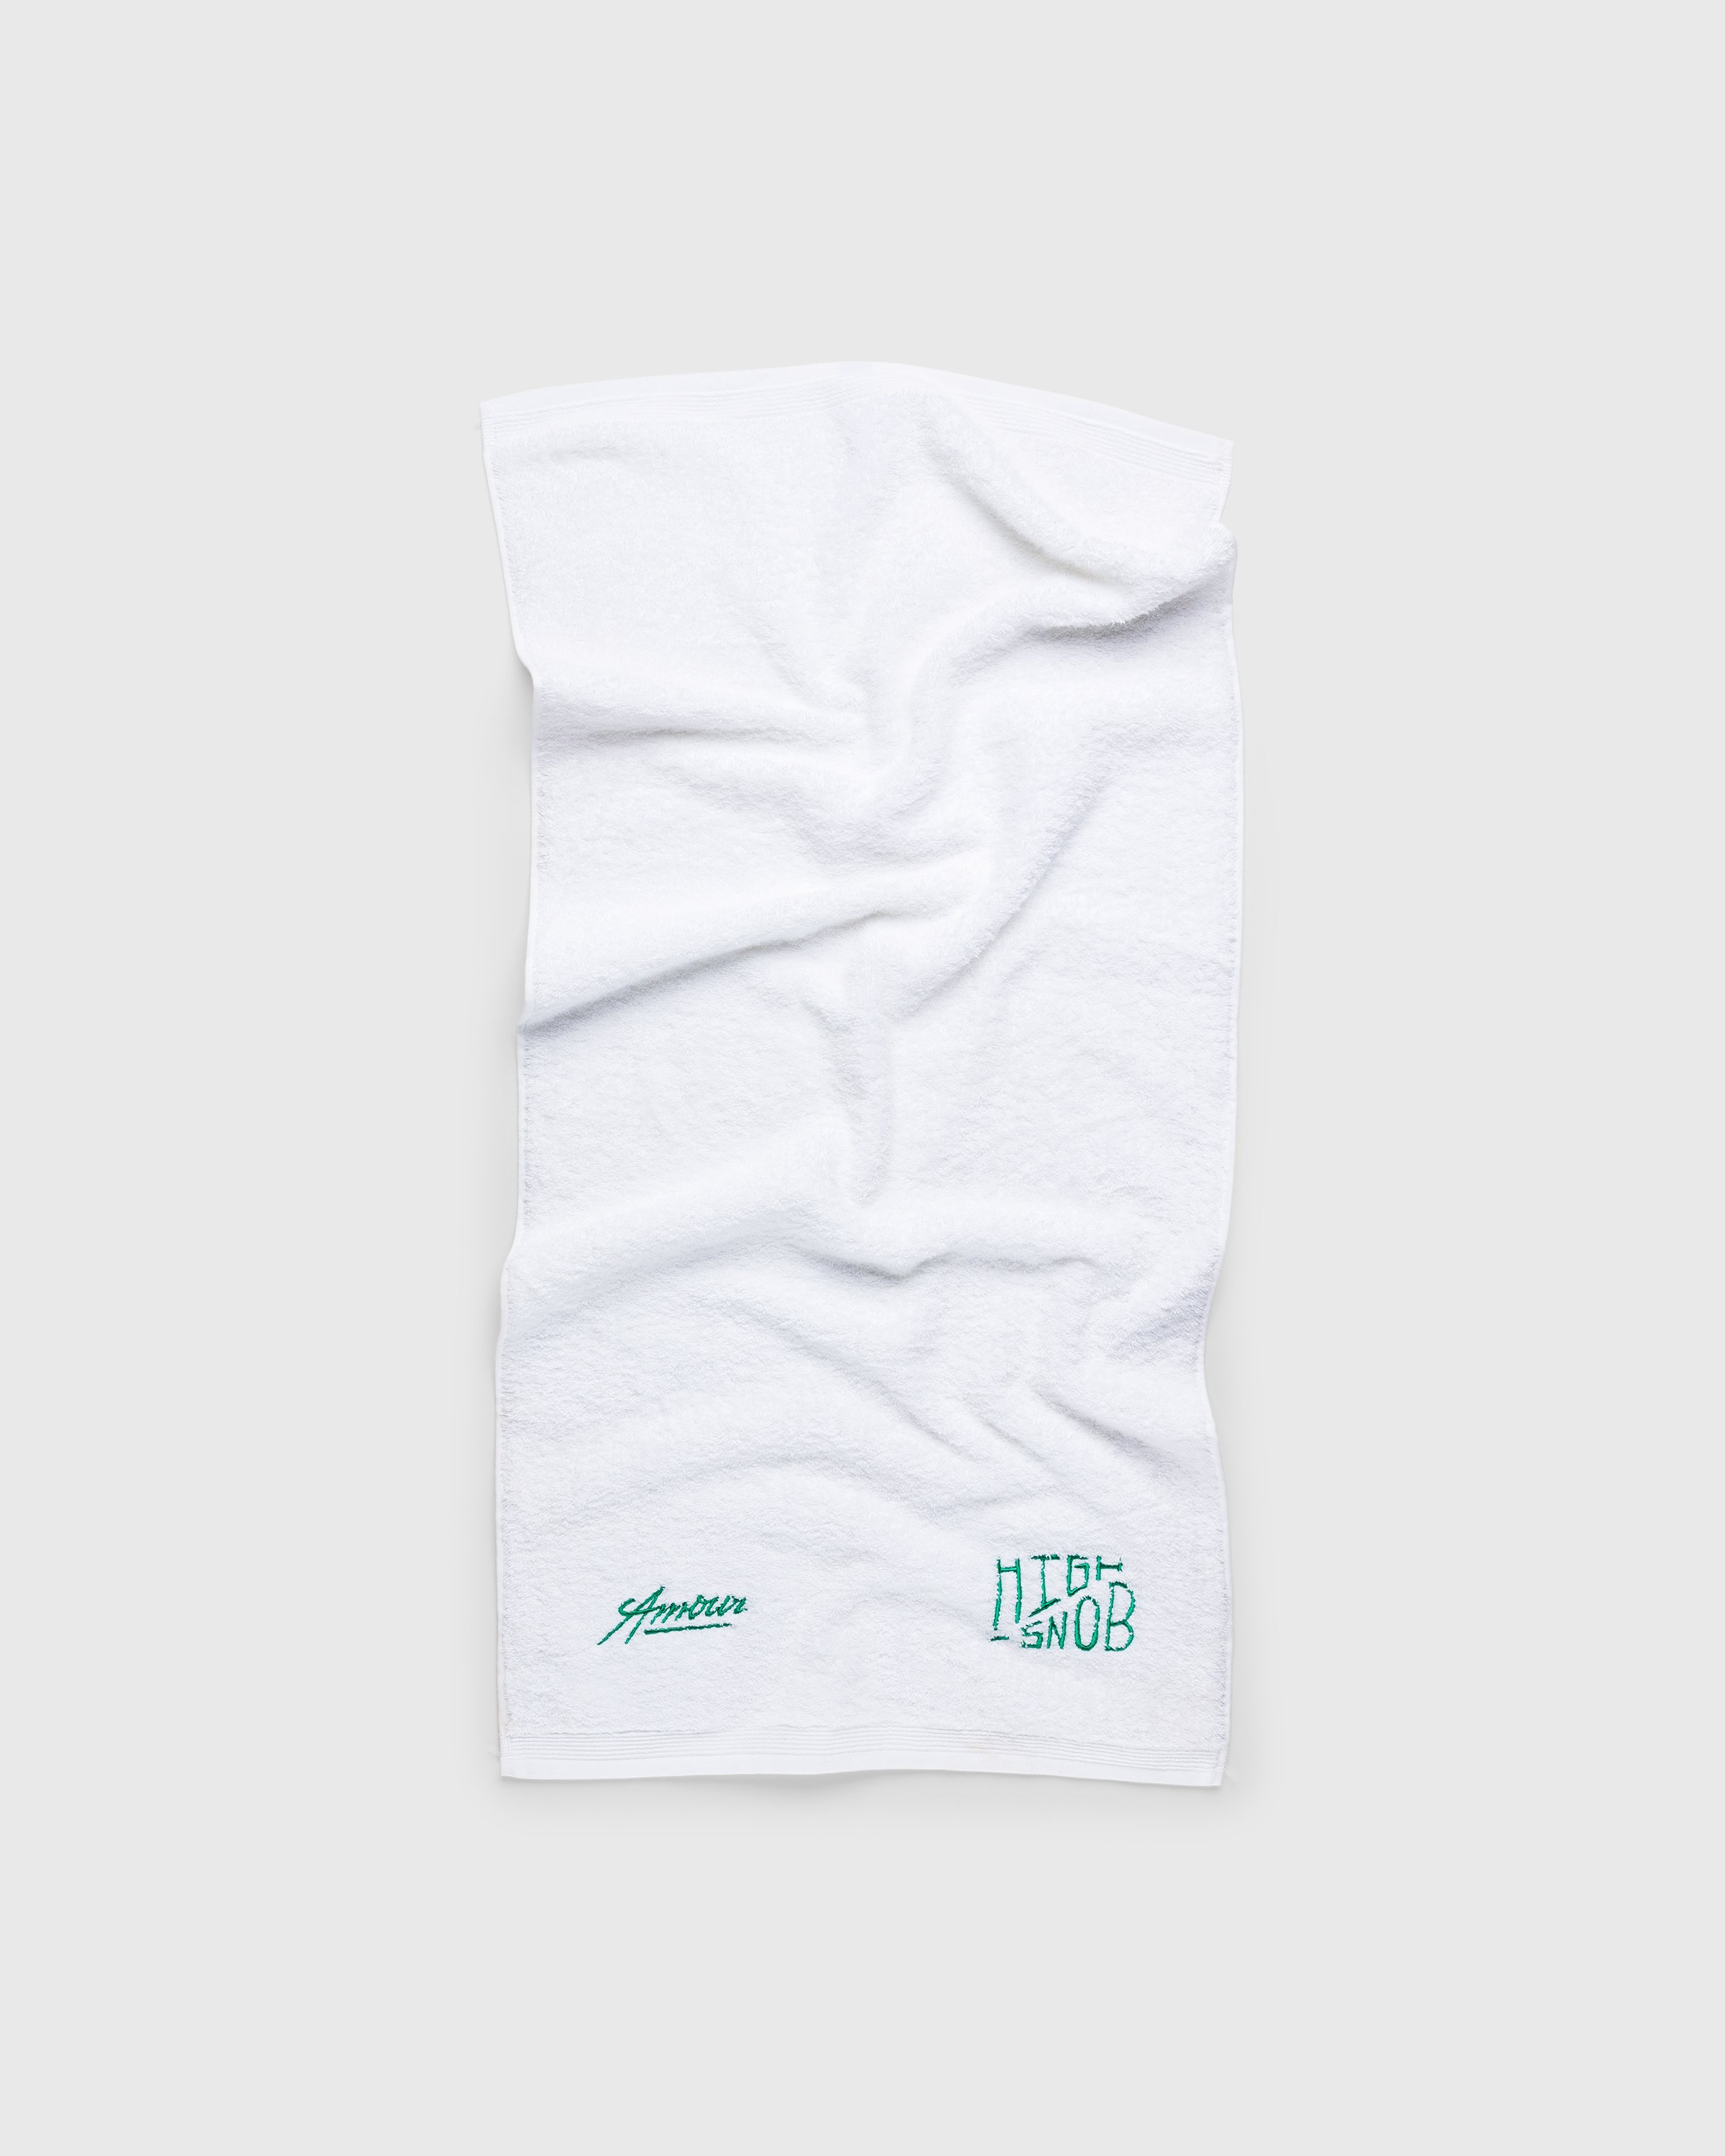 Hotel Amour x Highsnobiety - Not In Paris 4 Towel White - Lifestyle - White - Image 1